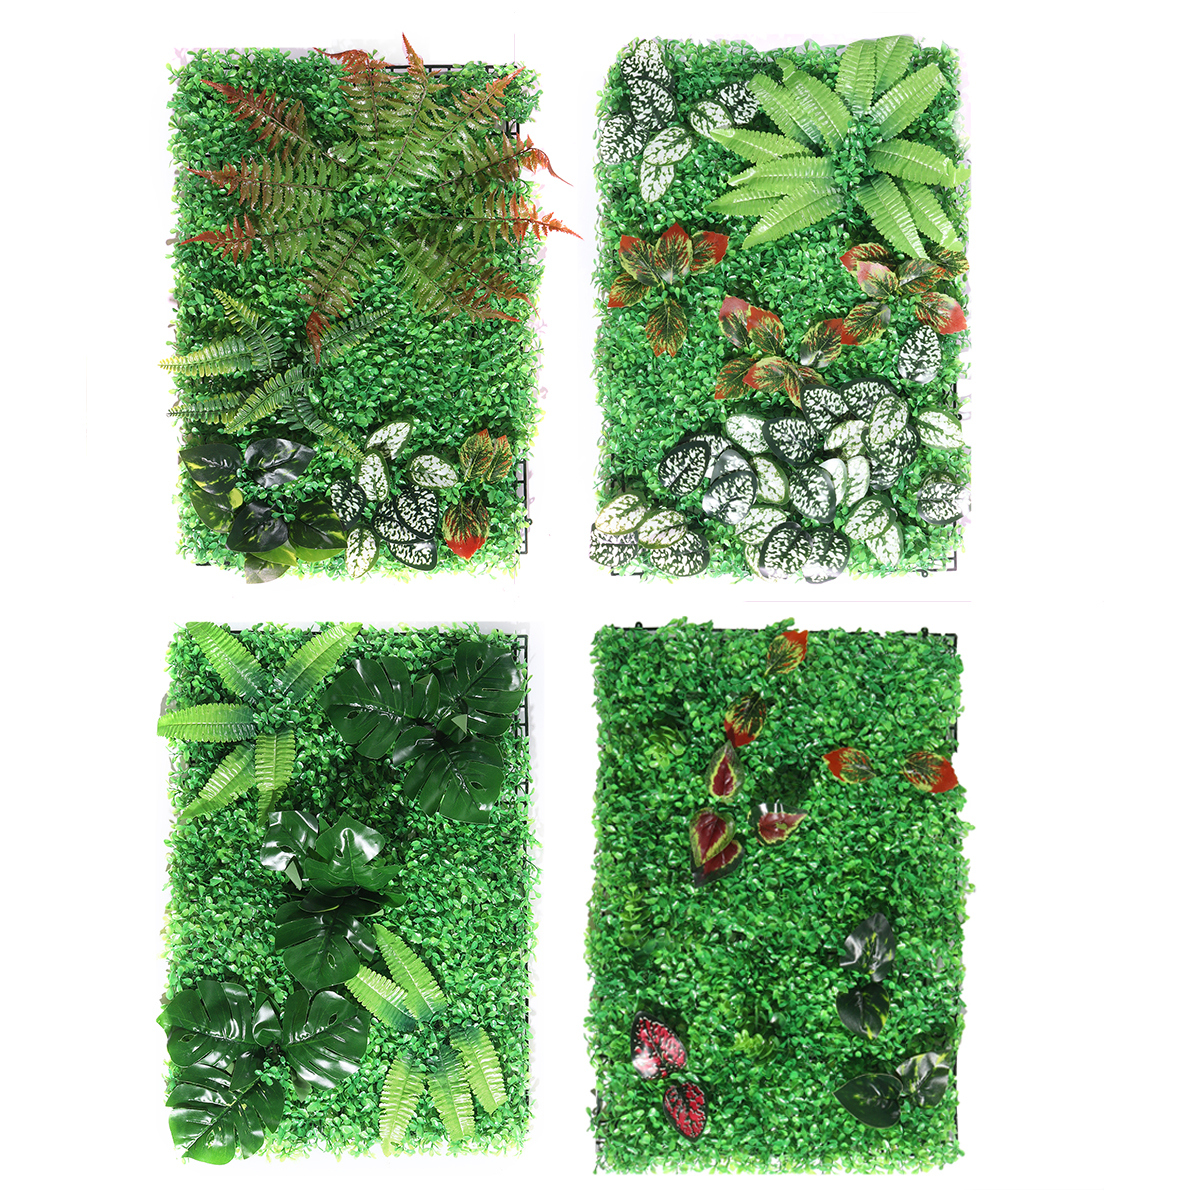 Artificial-Plant-Wall-Topiary-Hedges-Panel-Plastic-Faux-Shrubs-Fence-Mat-1712175-2